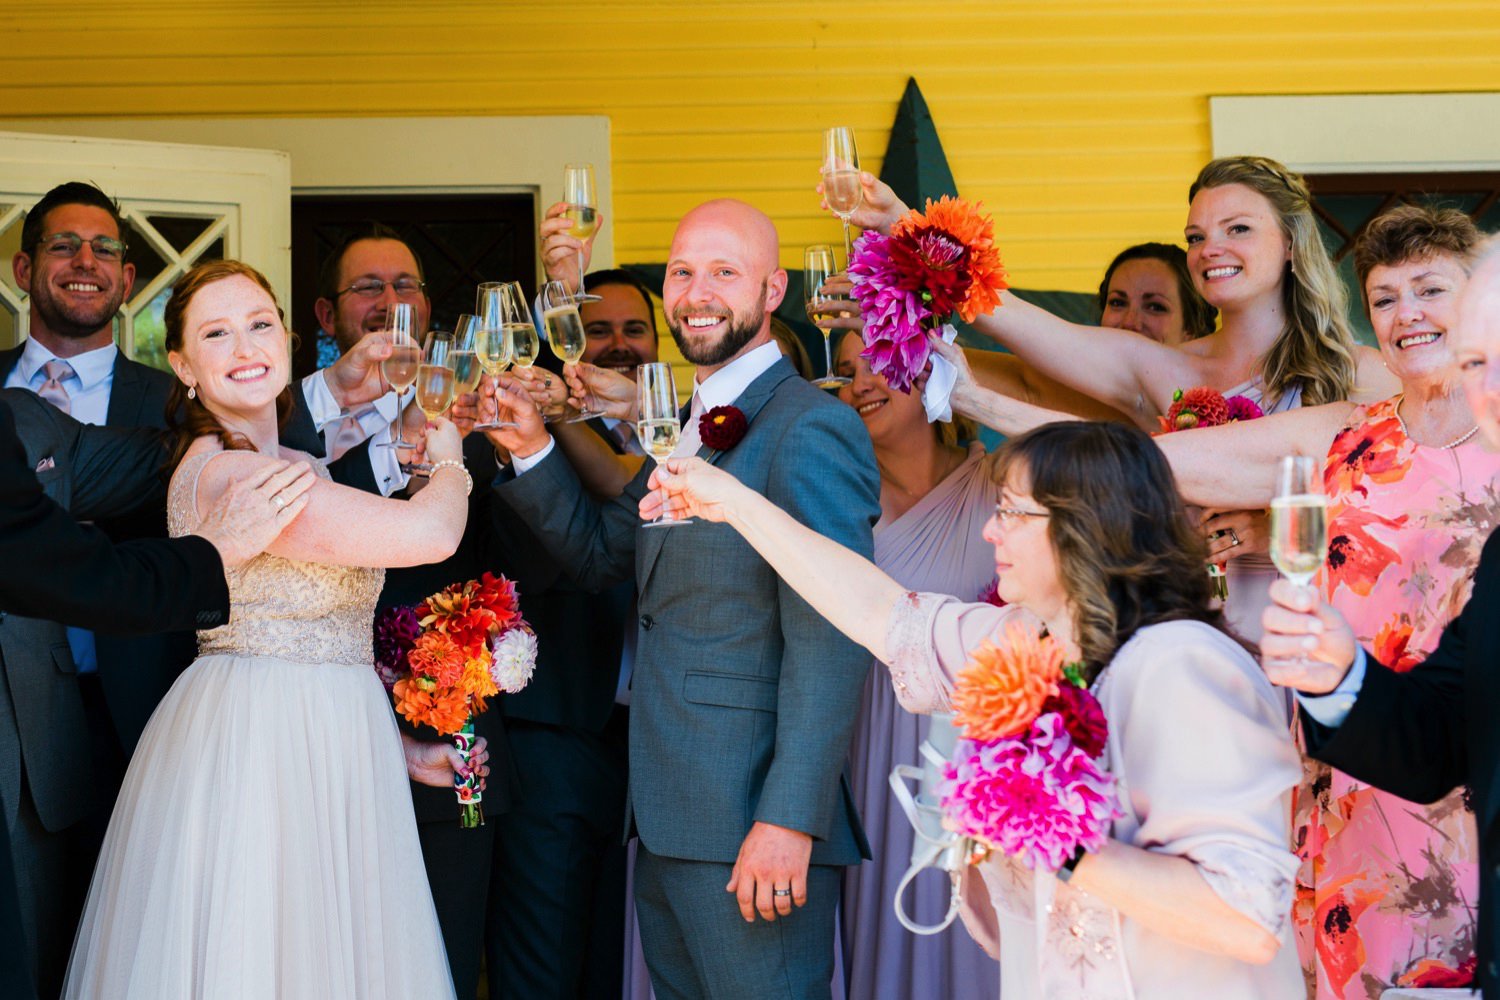 Seattle wedding photographer travels to capture champagne toast at wedding